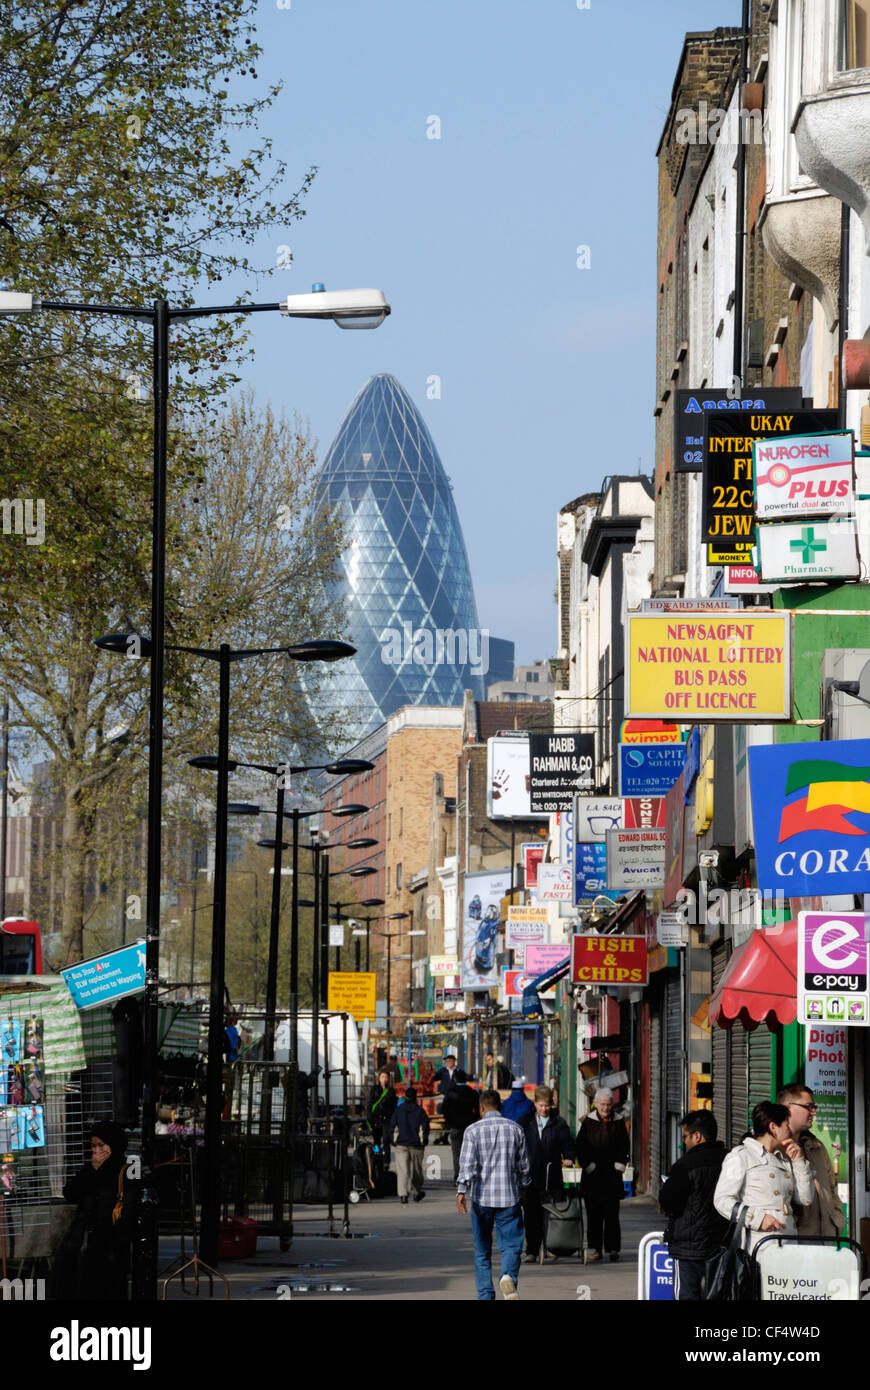 A view along Whitechapel Road towards the Gherkin (Swiss Re Building) in the City of London in the distance. Stock Photo